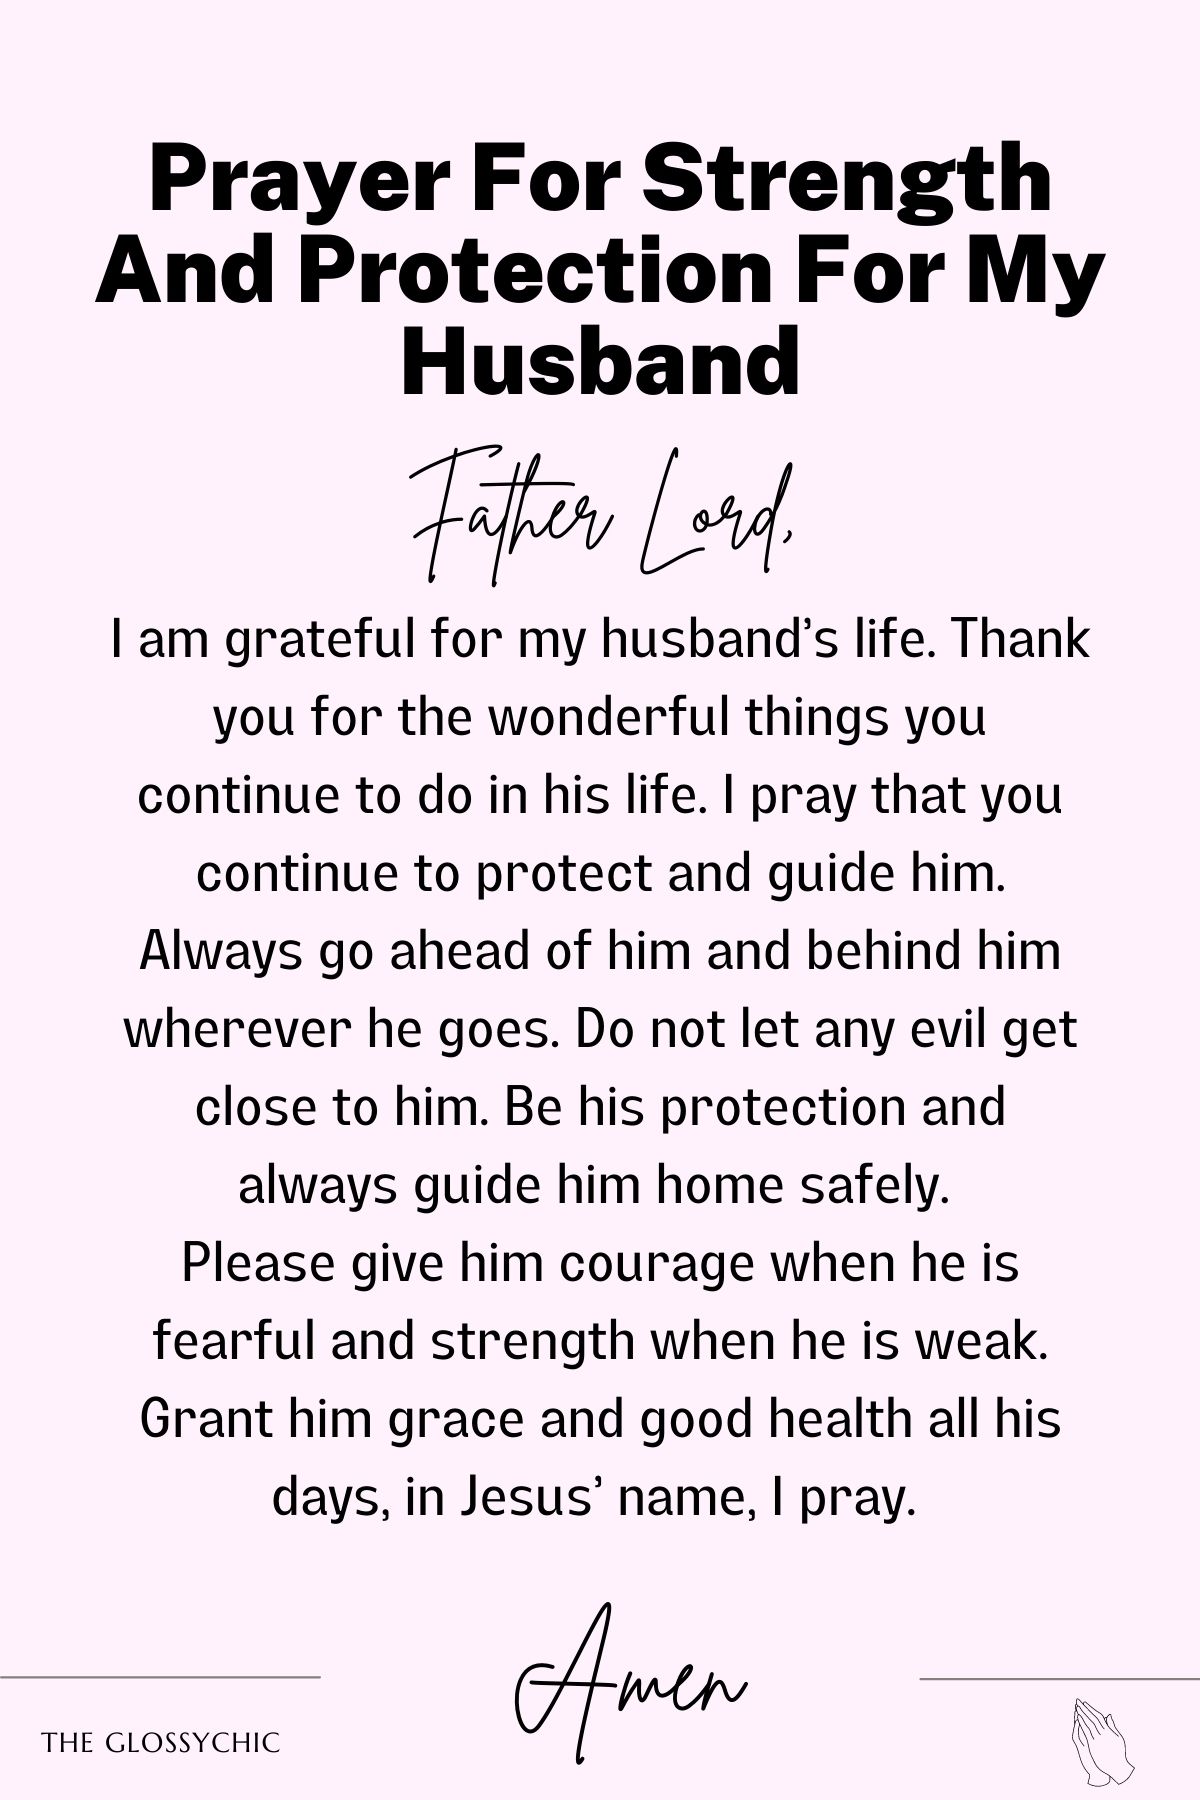 Prayer for strength and protection for my husband